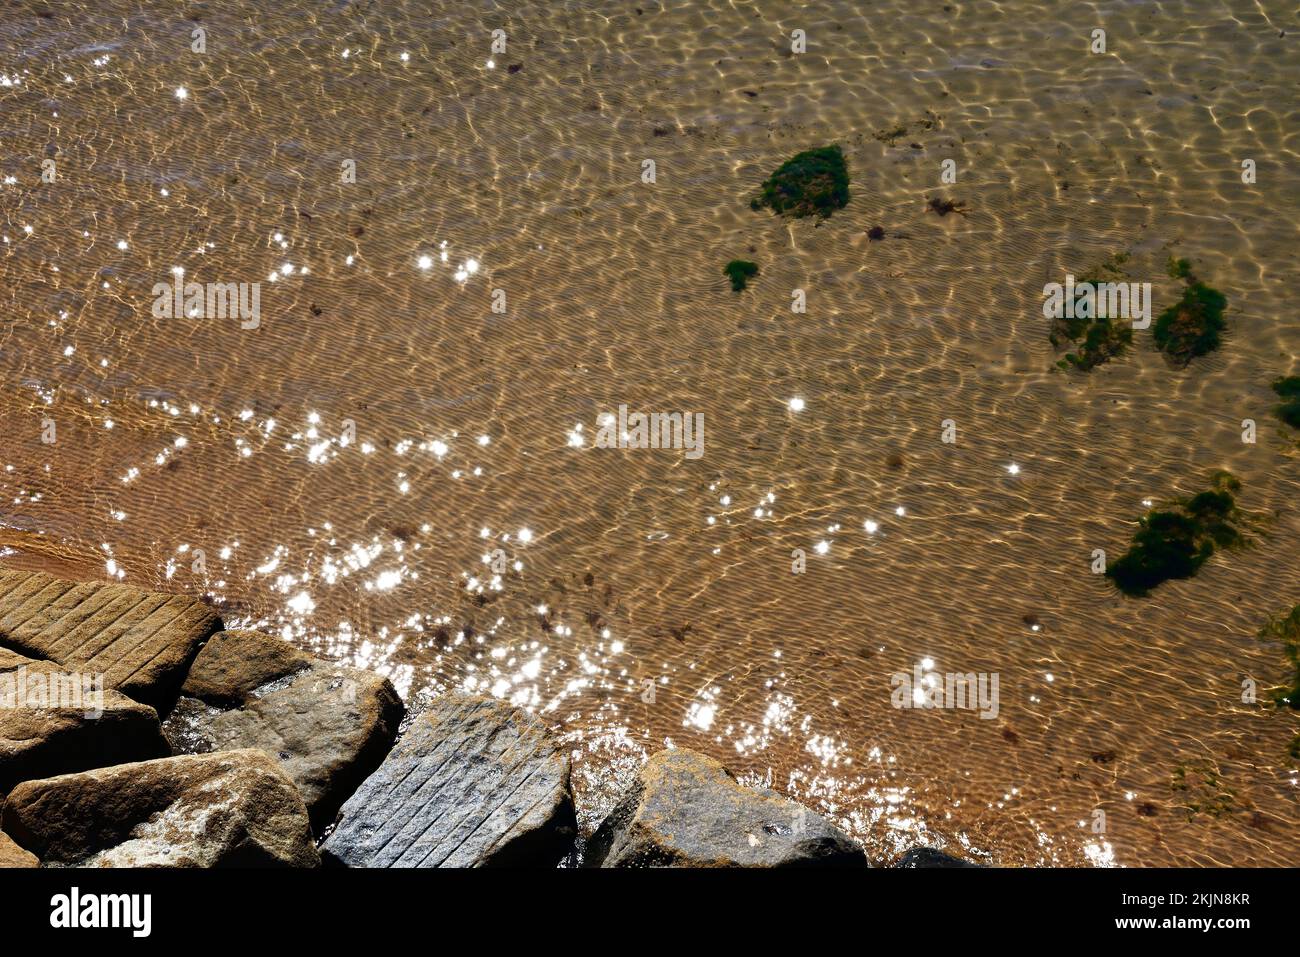 View looking down at the shallow sea water with rocks in the foreground, Sidmouth, Devon, UK, Europe Stock Photo